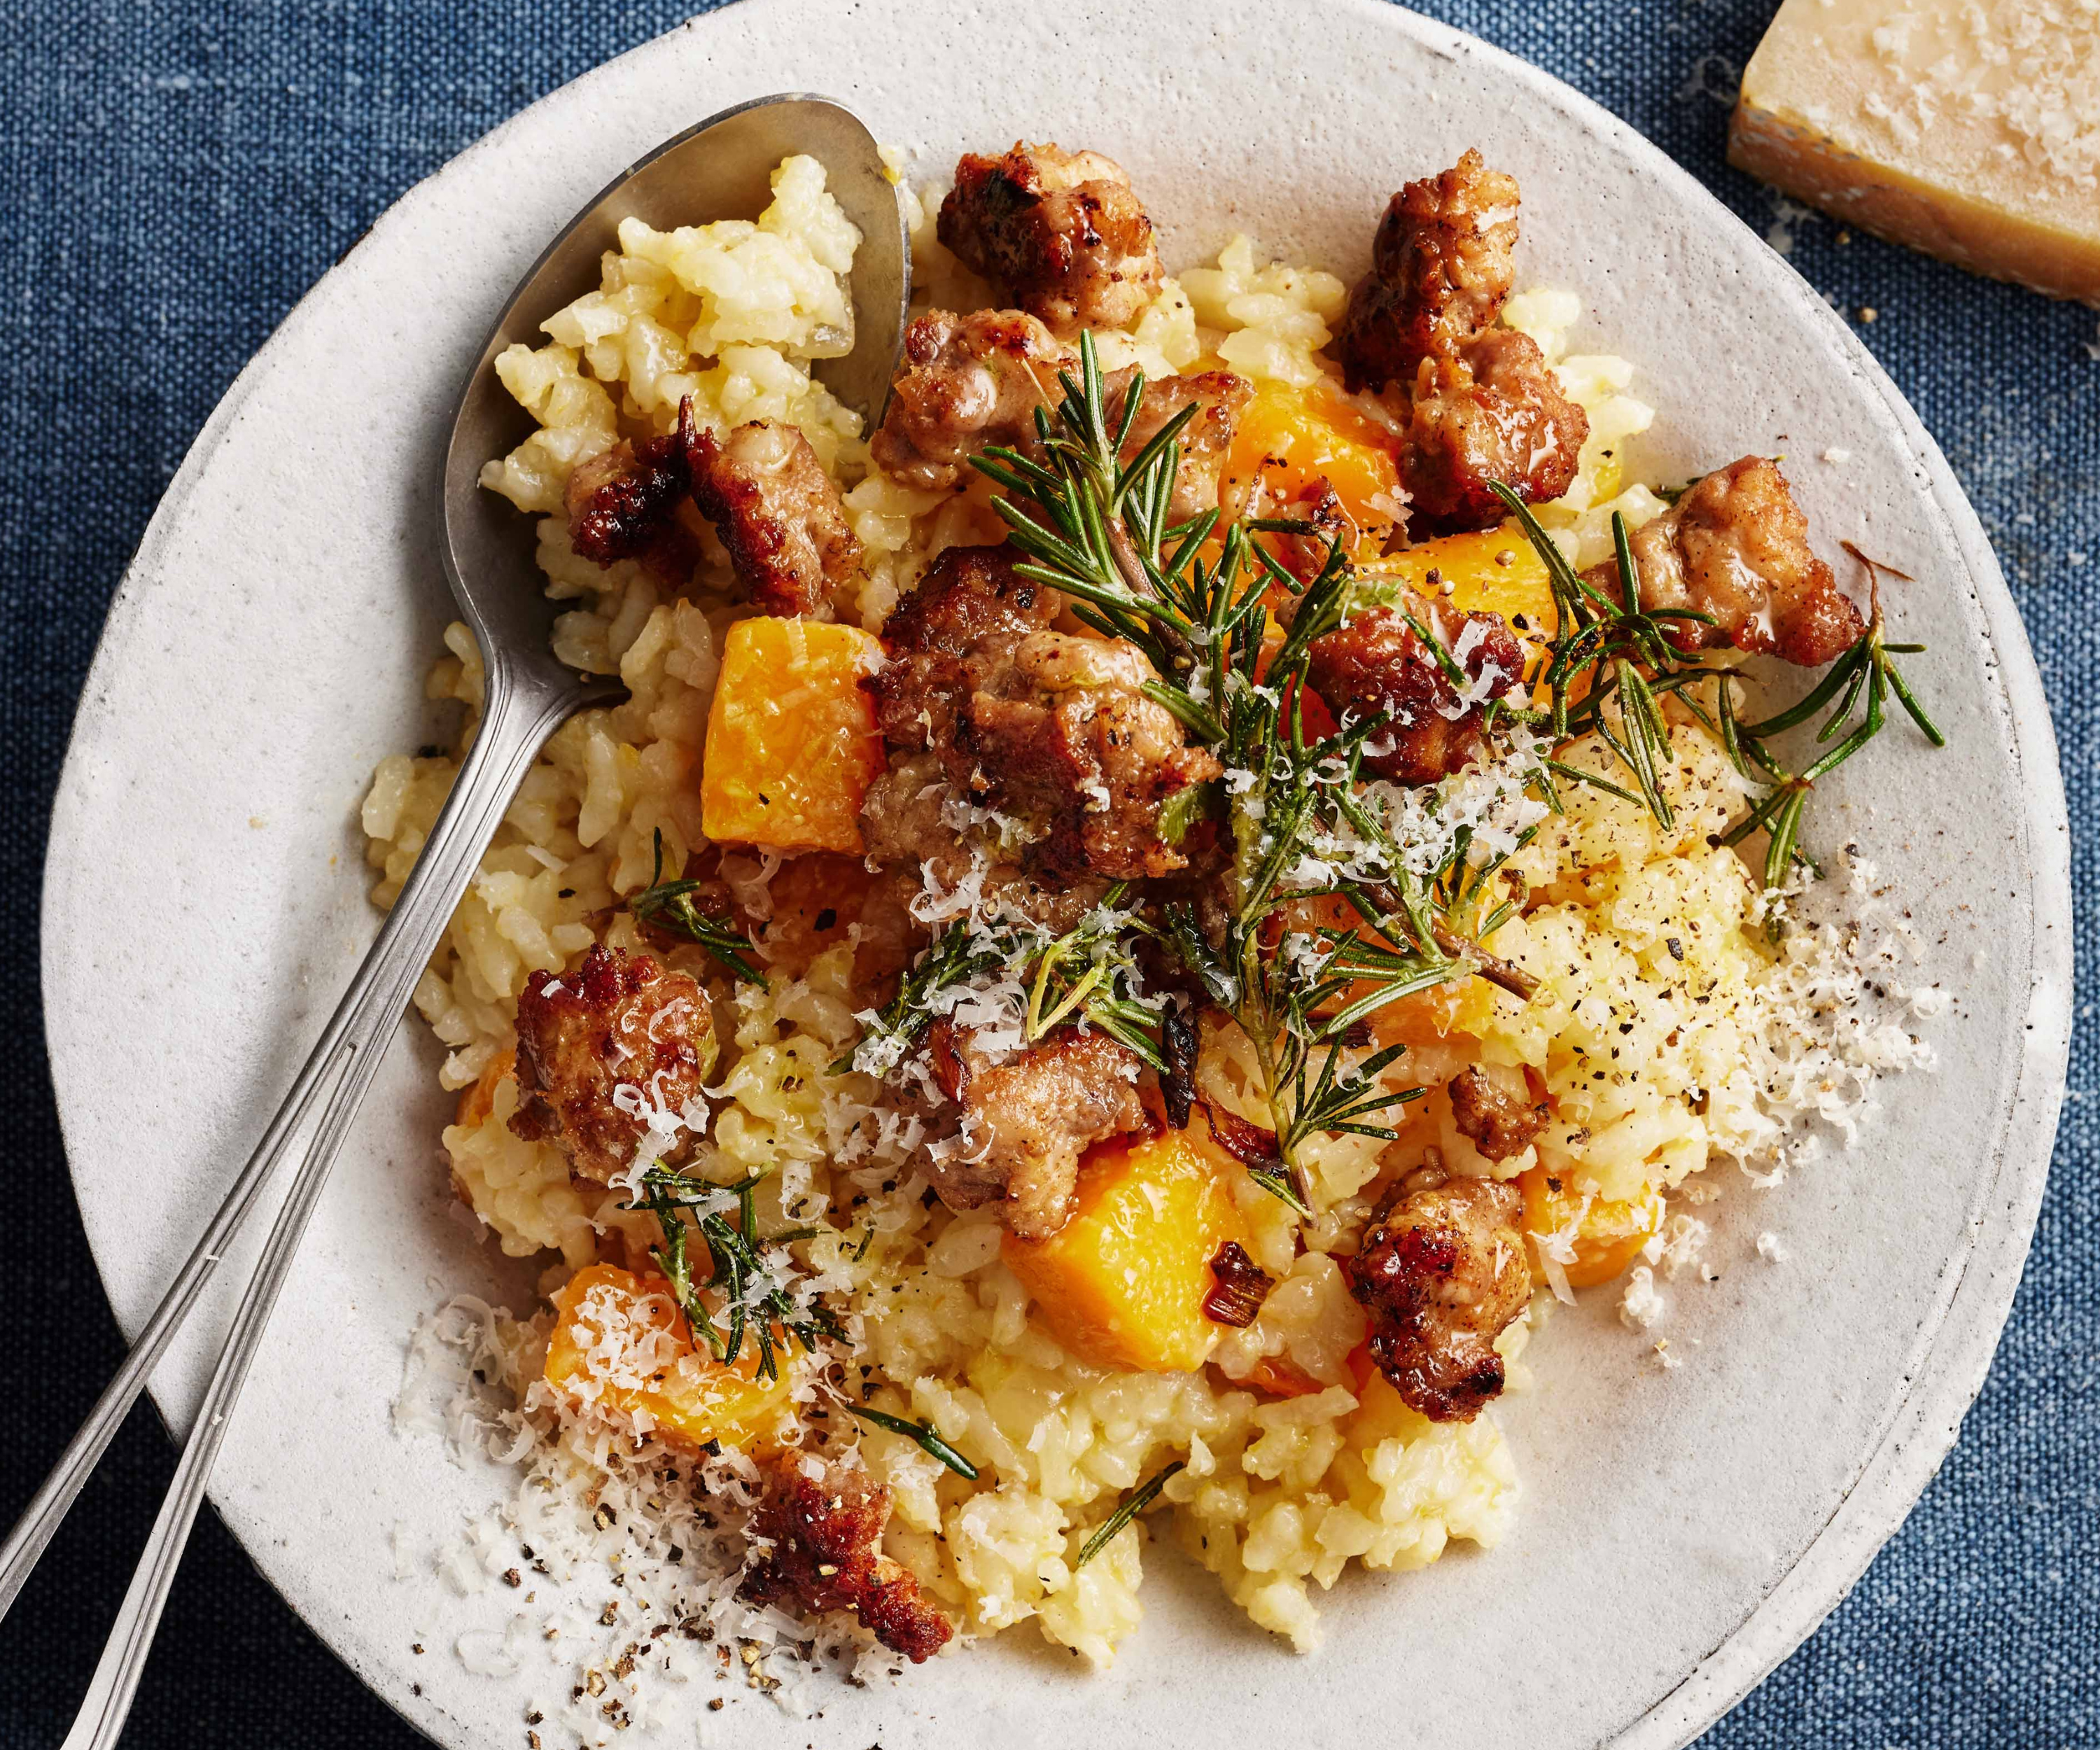 Pumpkin risotto with Italian sausage & rosemary